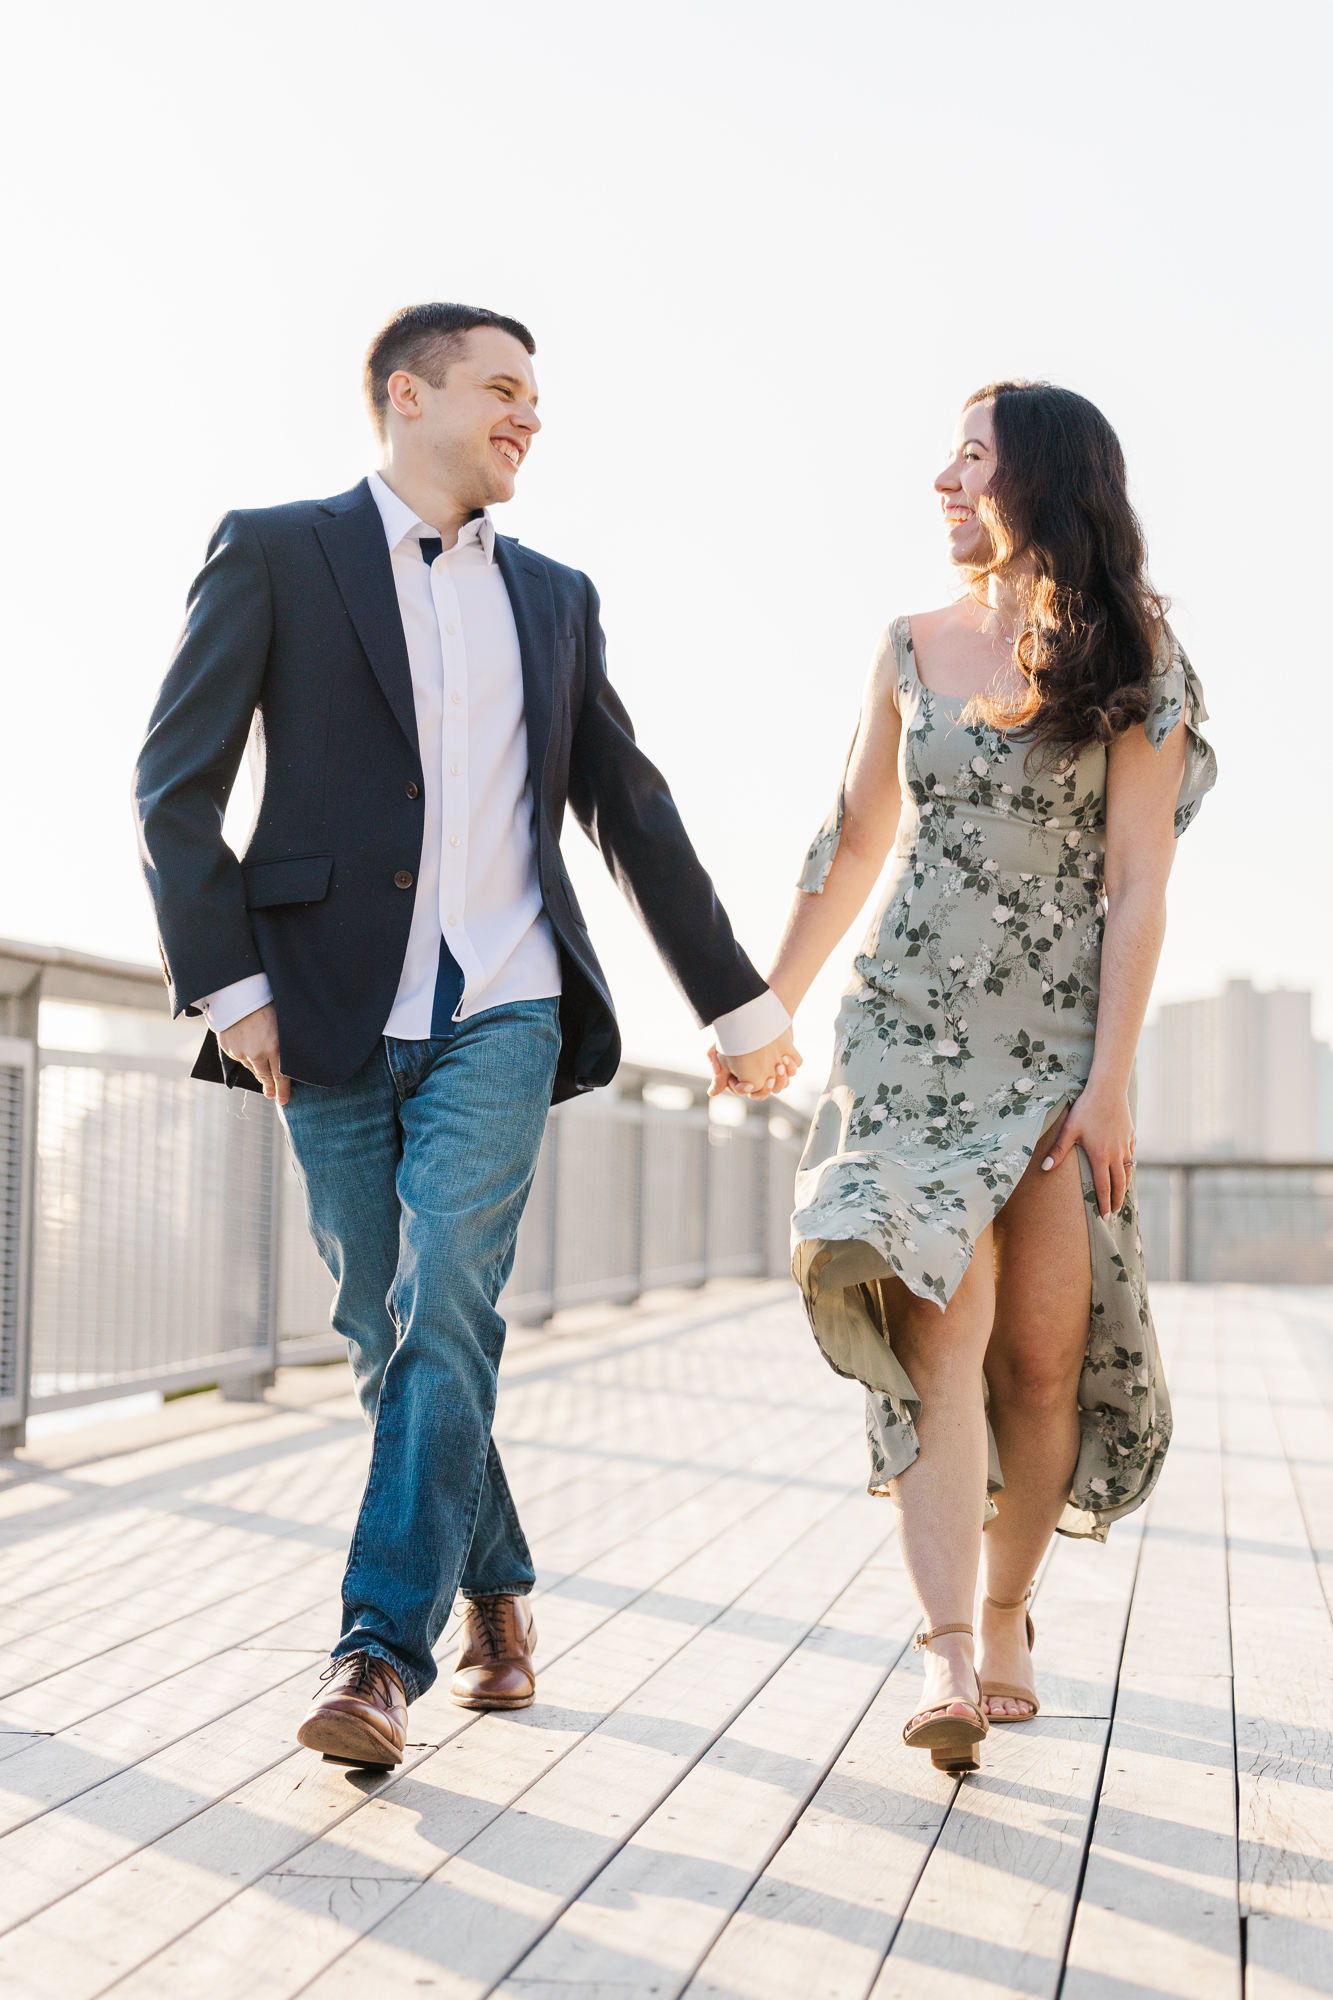 Radiant Brooklyn Bridge and South Street Seaport Engagement Photography